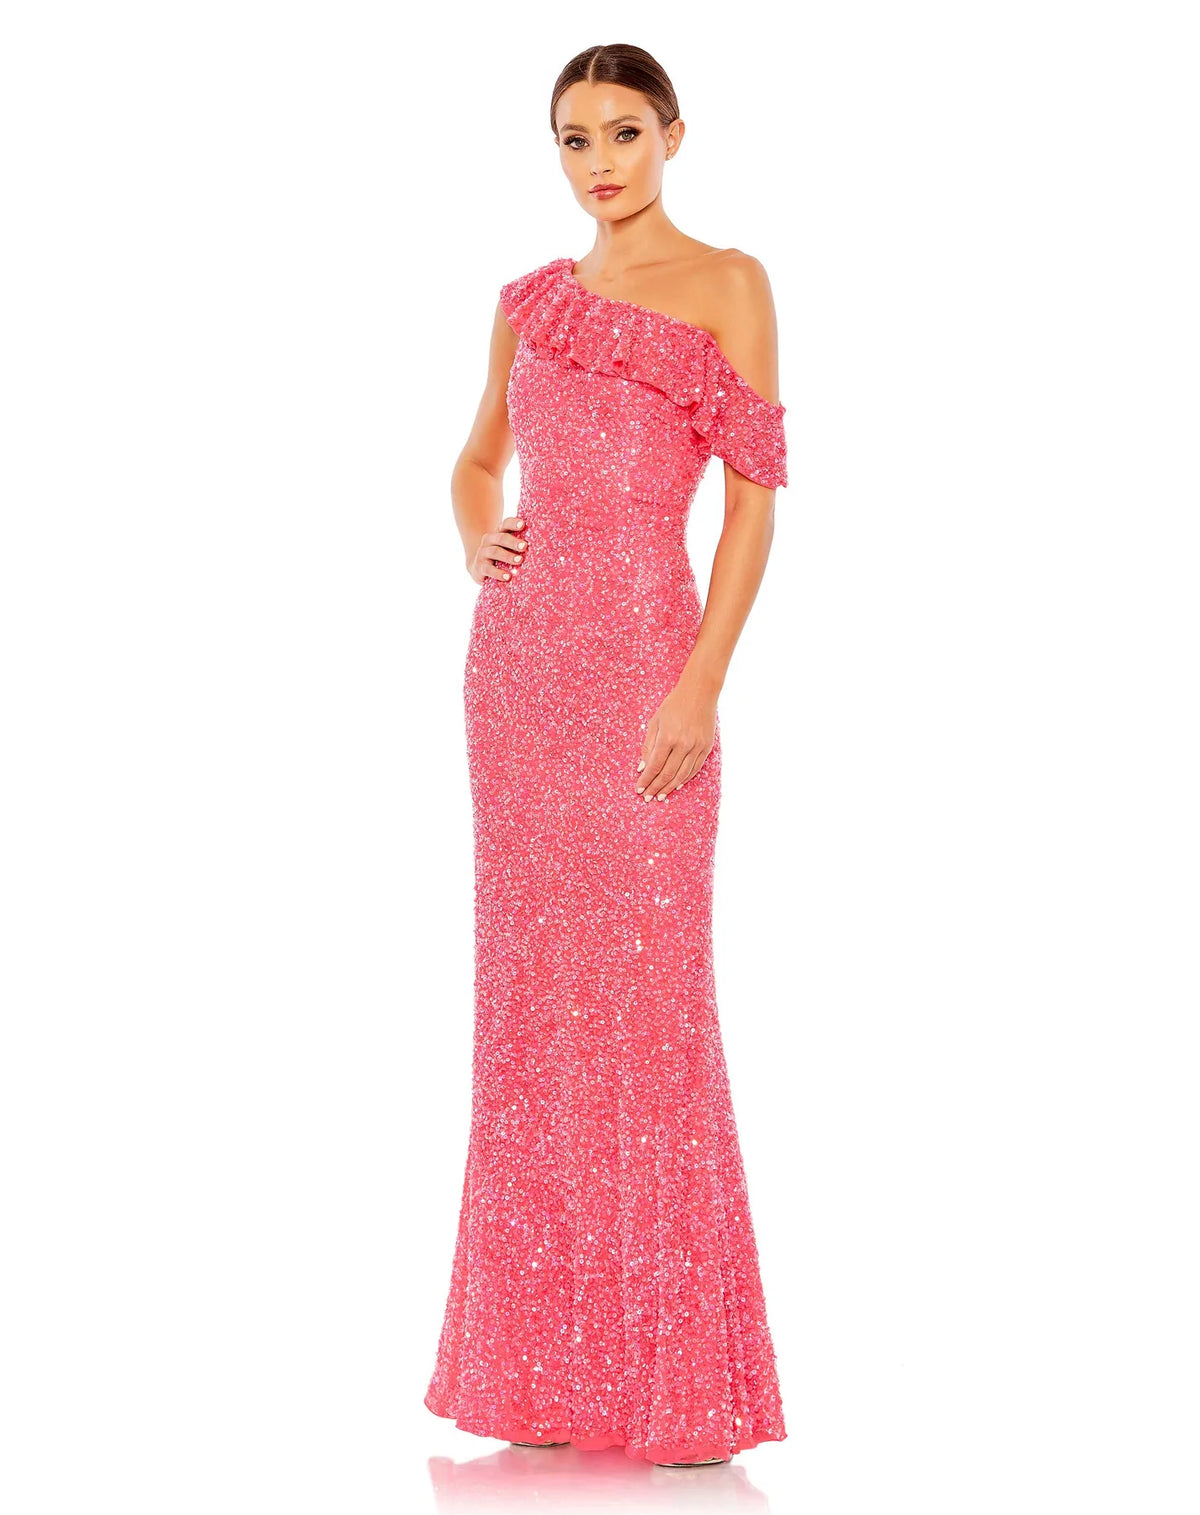 This feminine and sophisticated watermelon pink coloured sequin, floor-length evening dress is a playful and Summery gown that will delight at weddings and special events! With elegant ruffle detail over the chest and one drop shoulder, this dress is fitted to hug your every curve and show off your gorgeous figure! You will truly sparkle in all the photos in this special occasion dress! 